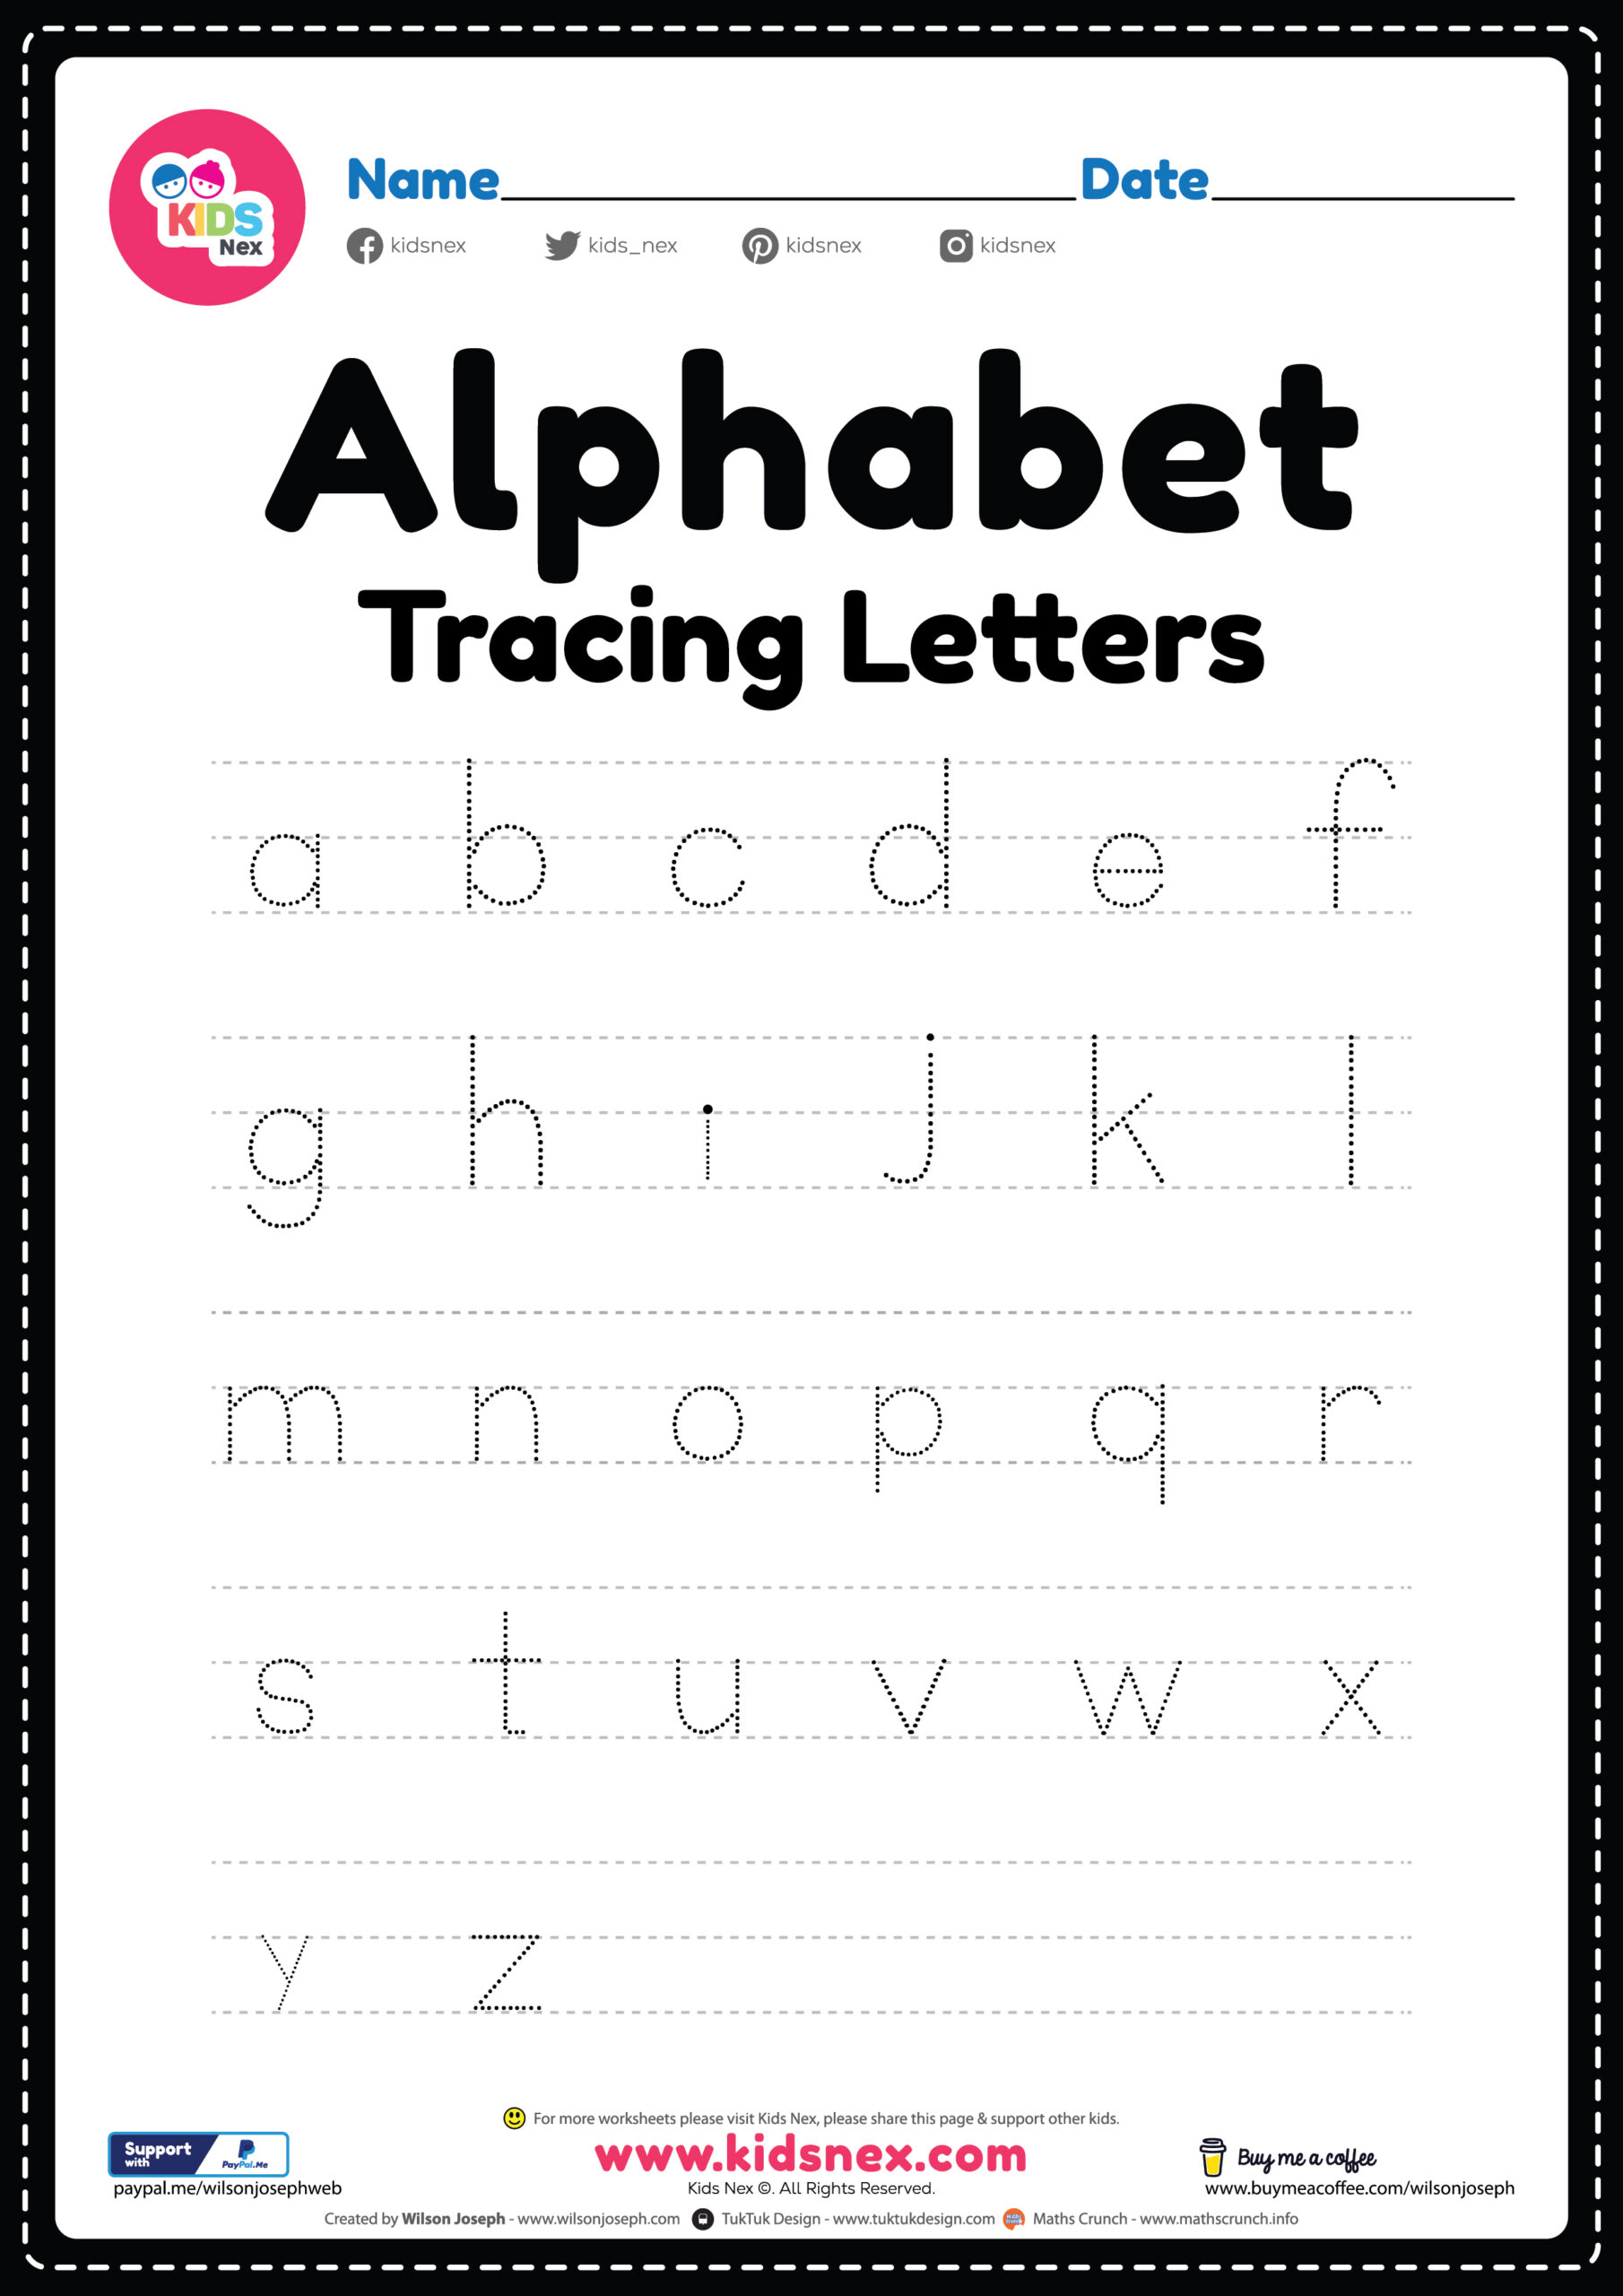 Tracing worksheet of Alphabet letters - Free Printable PDF